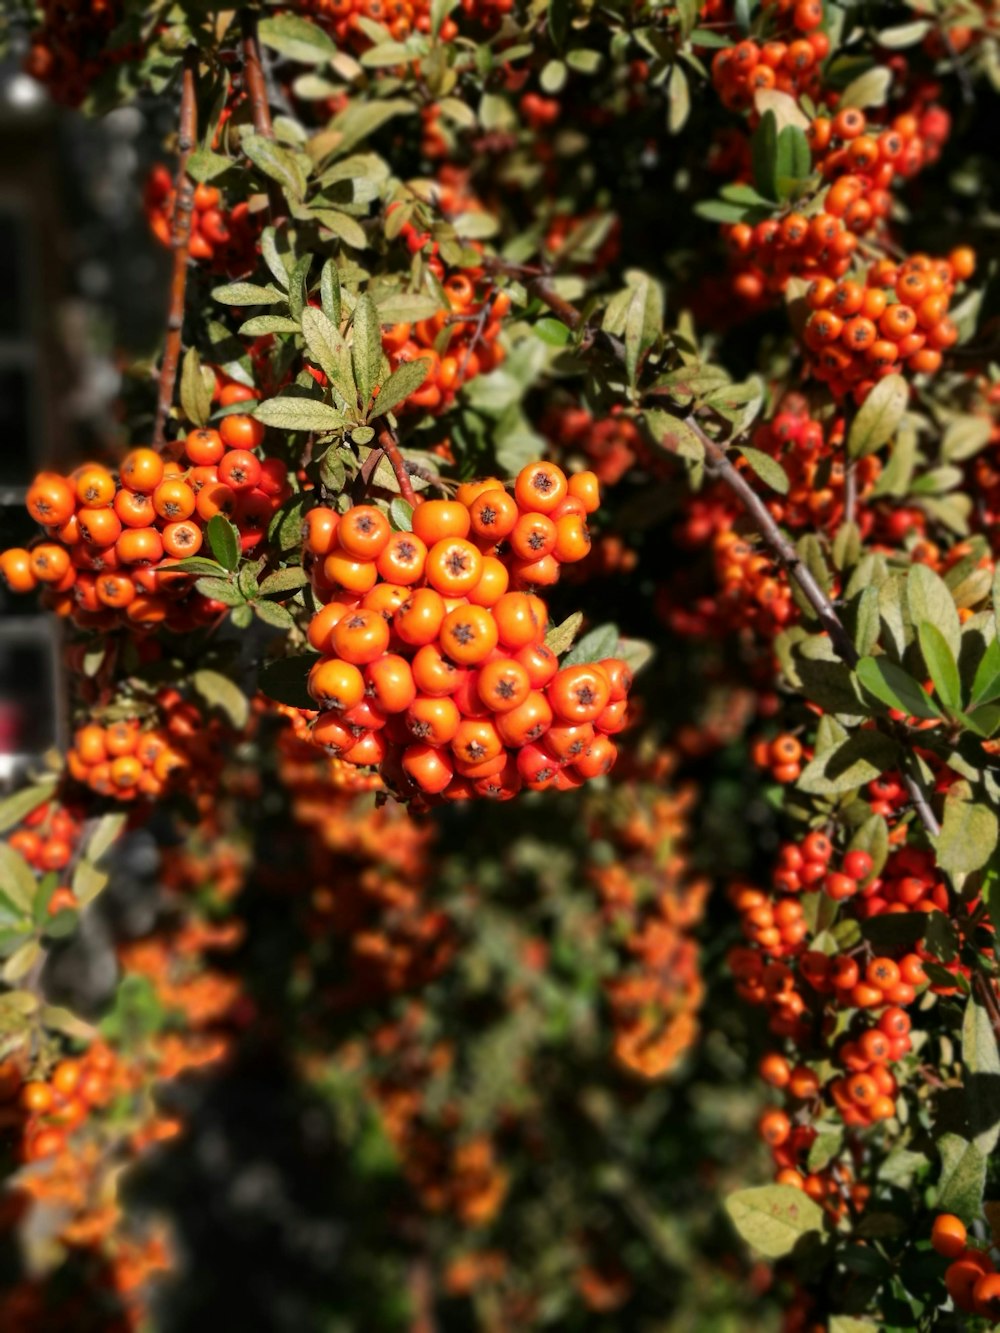 red round fruits on green tree during daytime